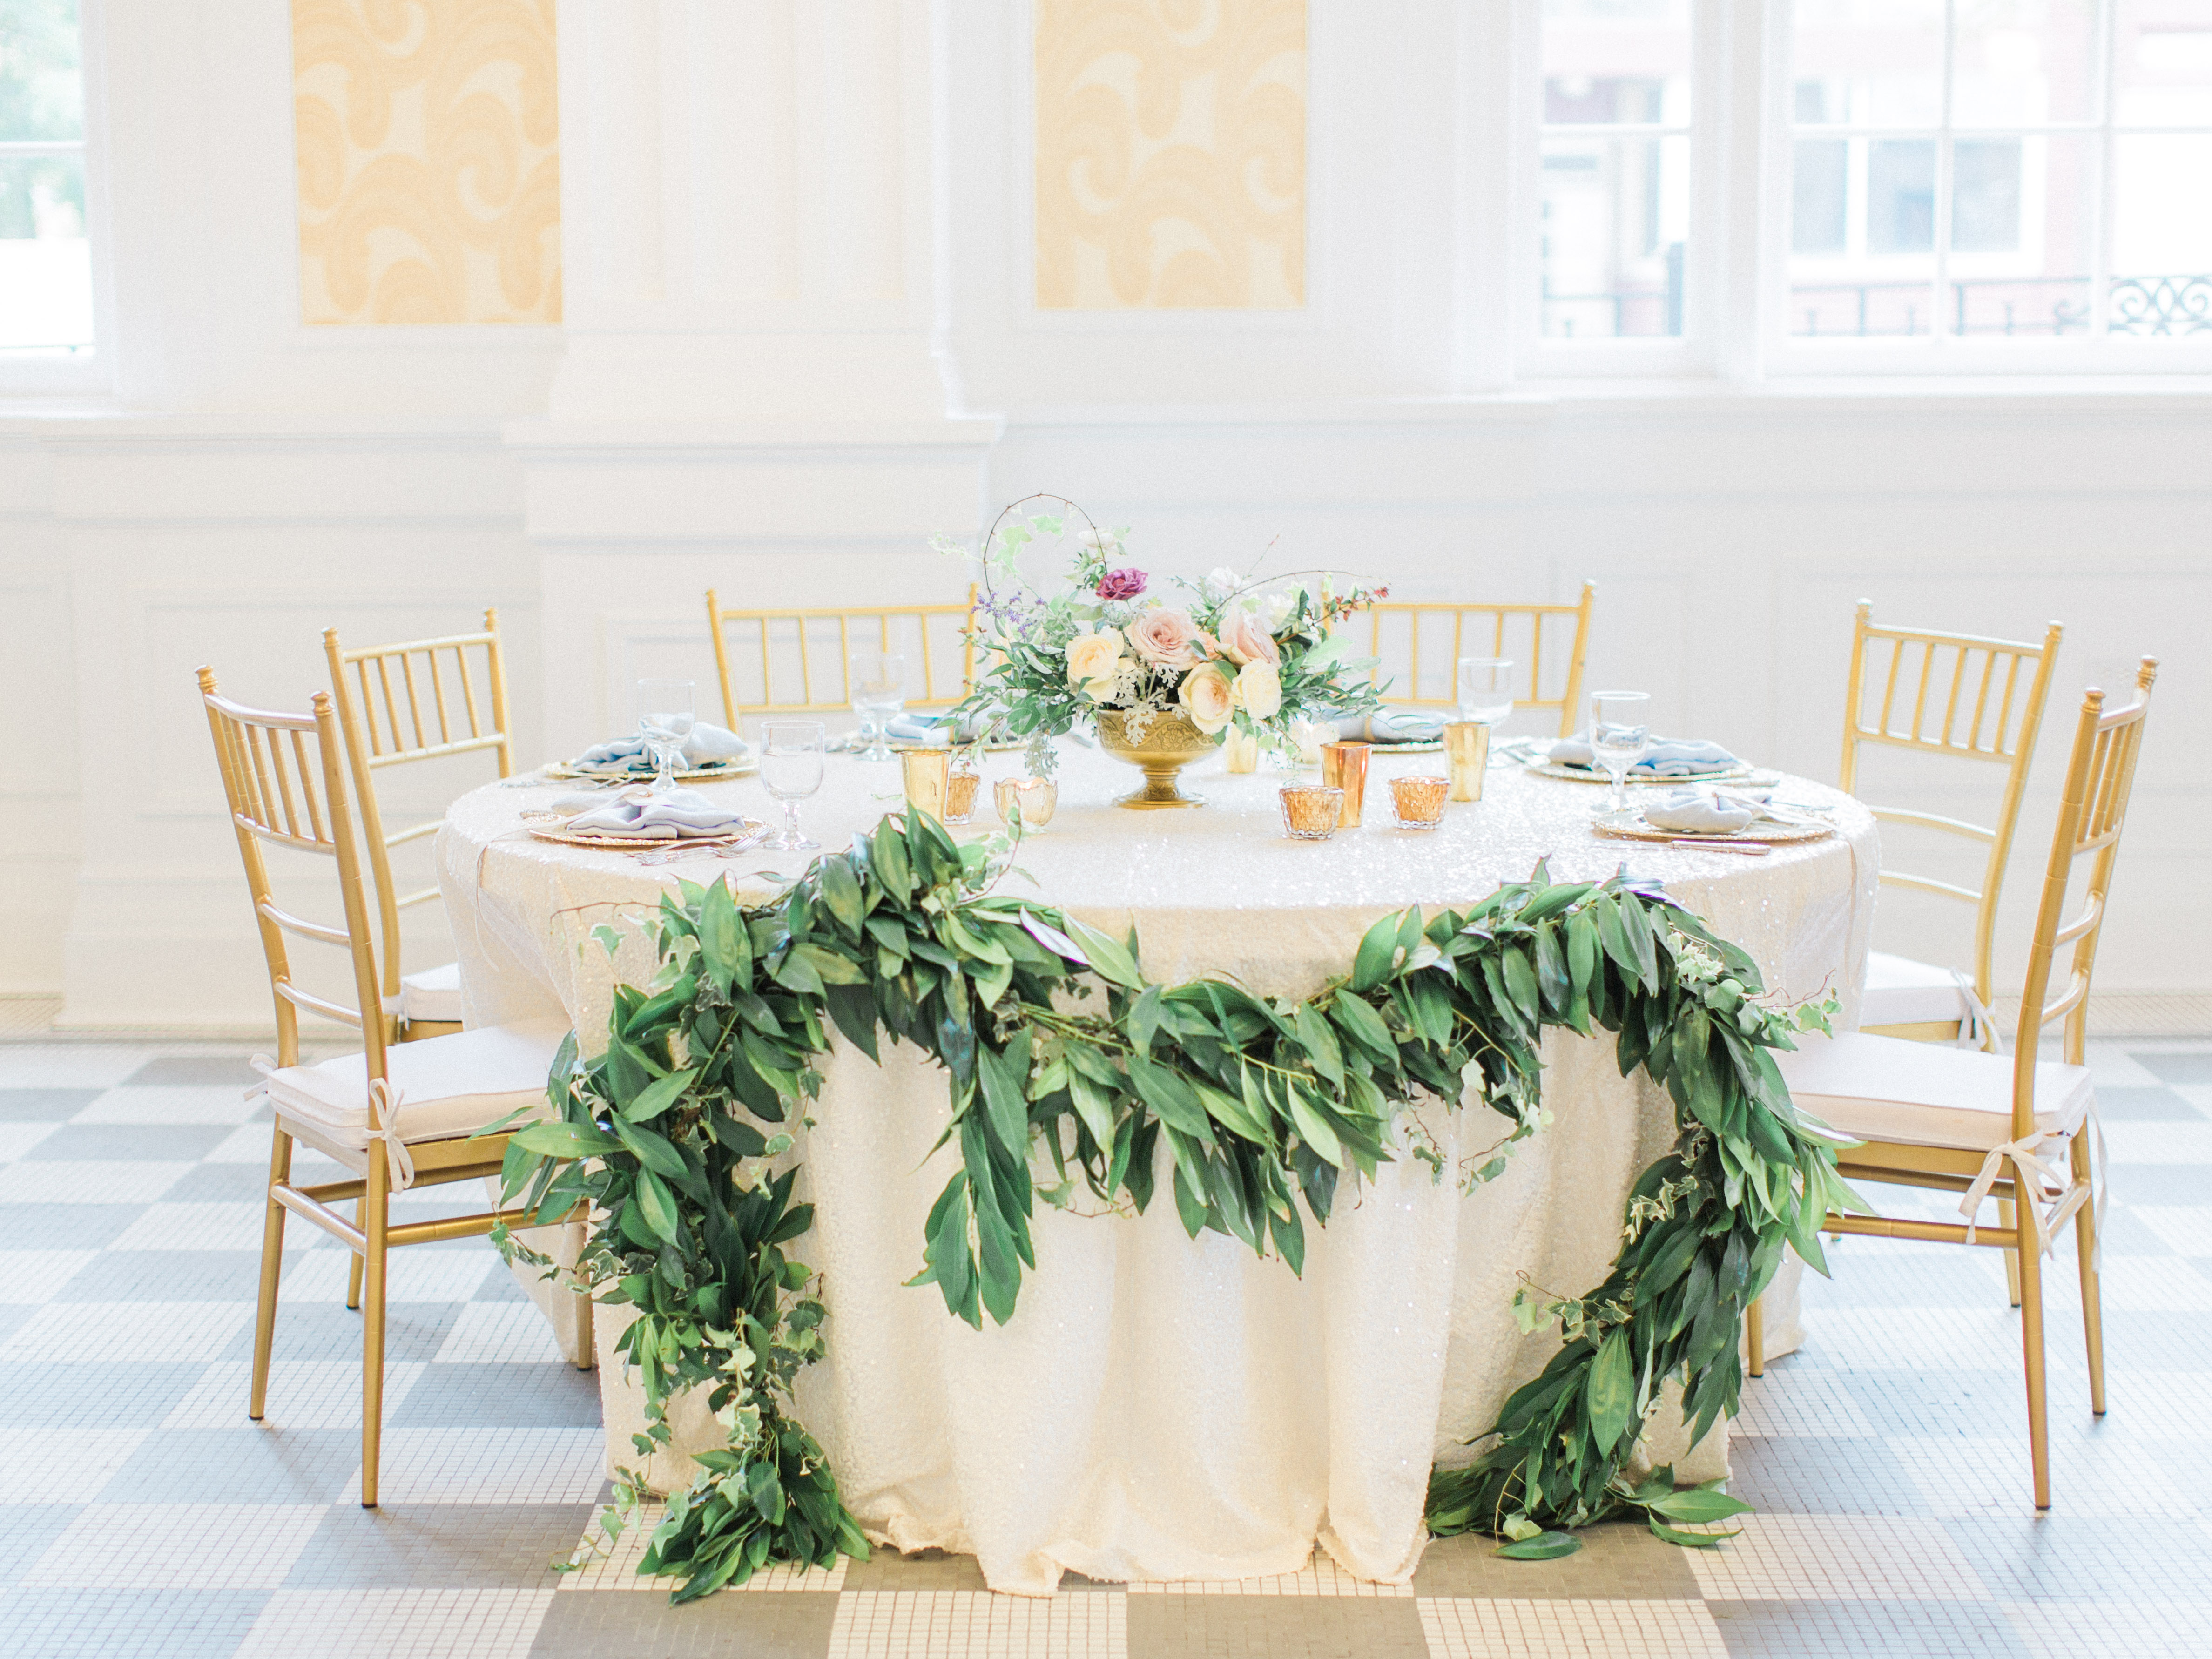 Sweeheart Table | The Day's Design | Samantha James Photography